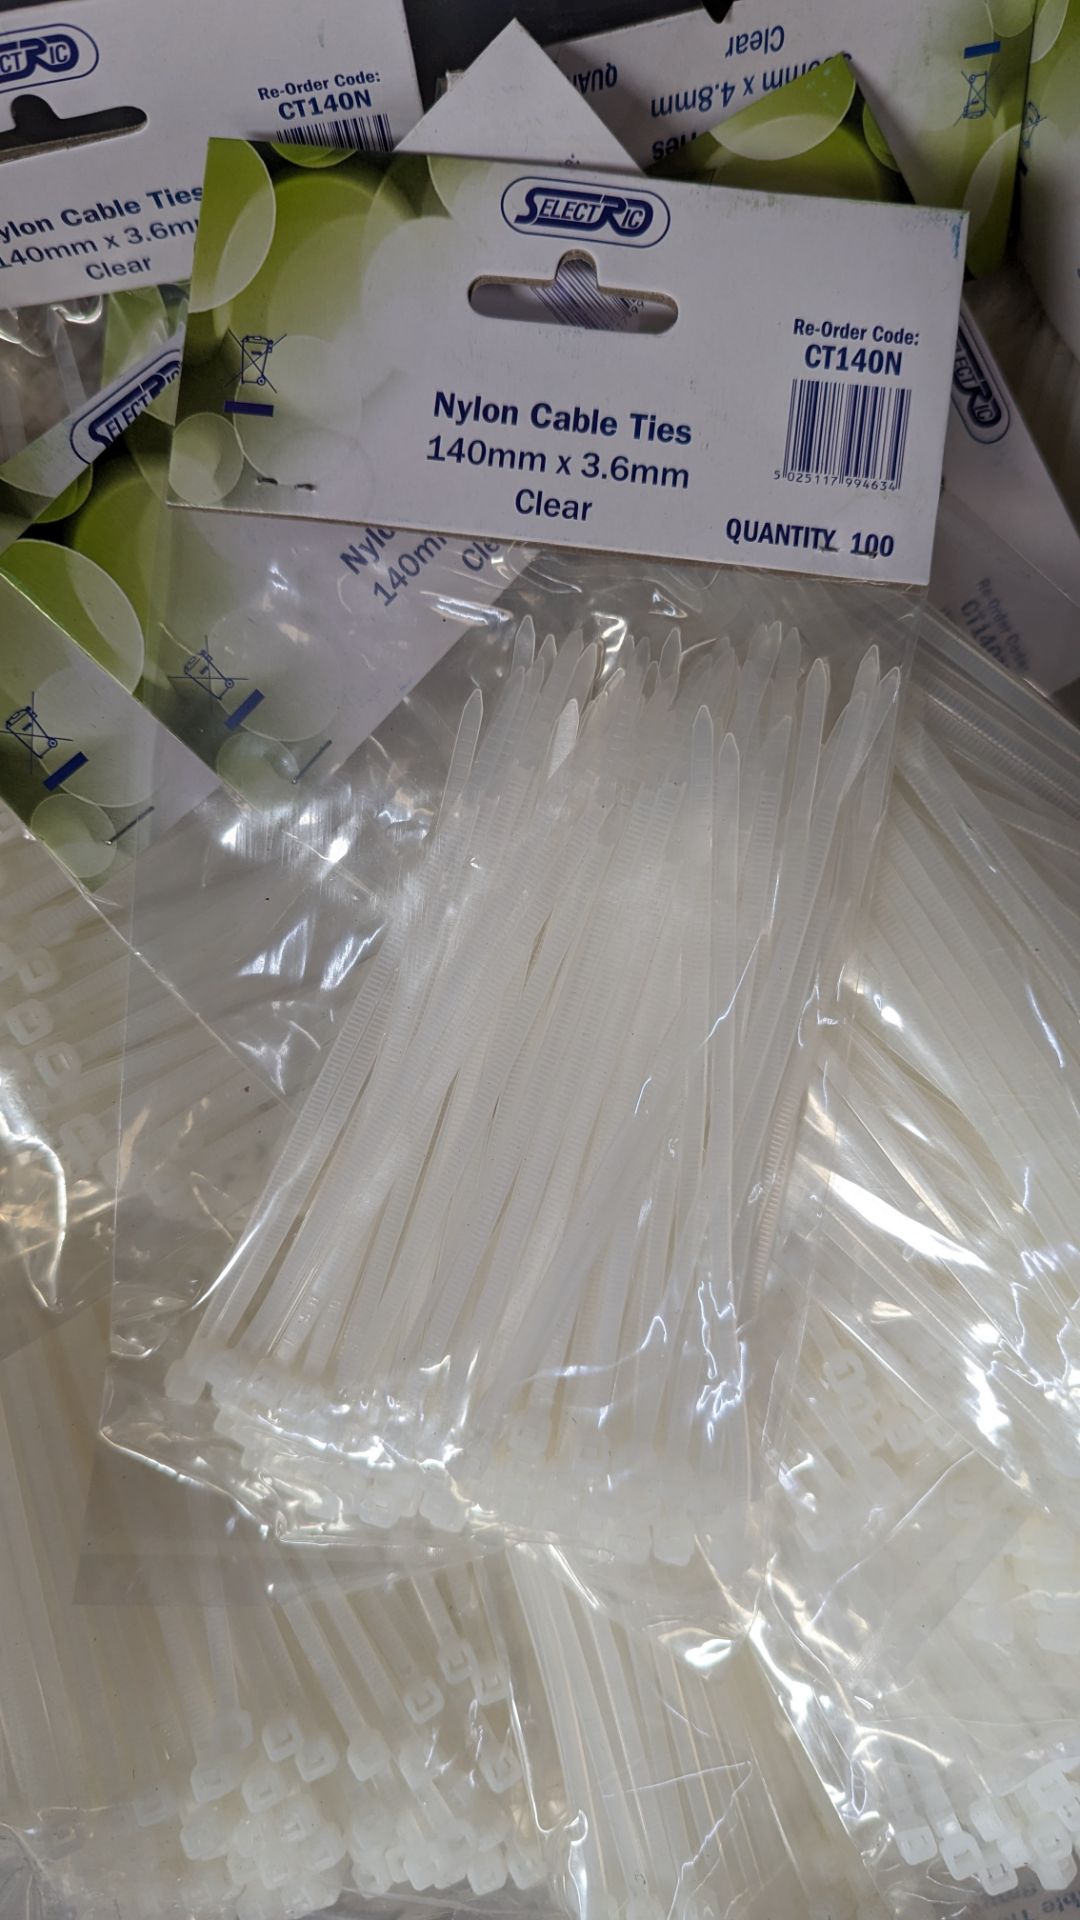 30 packs of assorted size nylon cable ties - Image 4 of 4